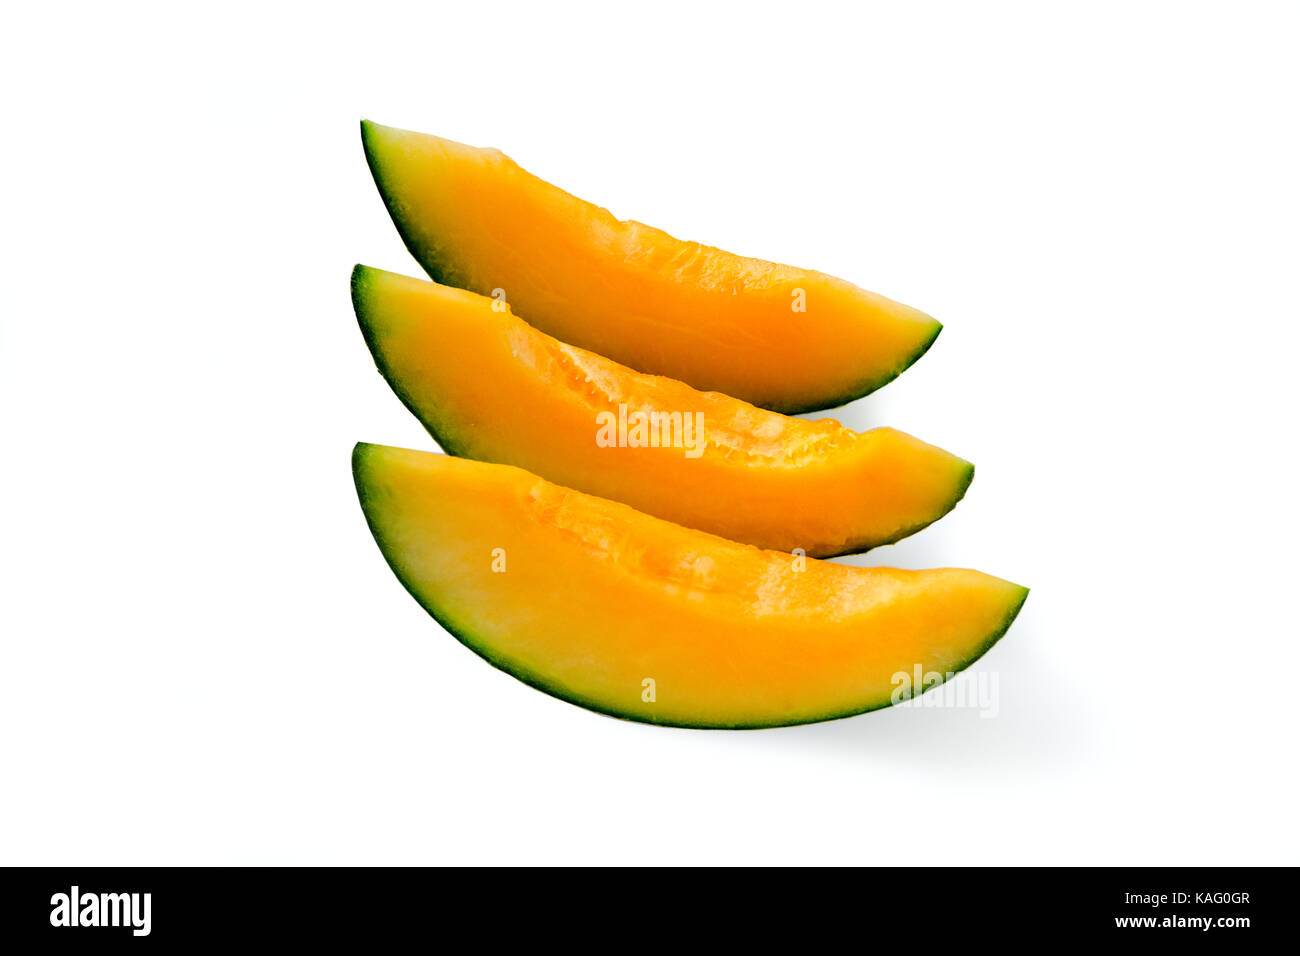 Cut pieces of ripe yellow melon. Seedless. Isolated Stock Photo